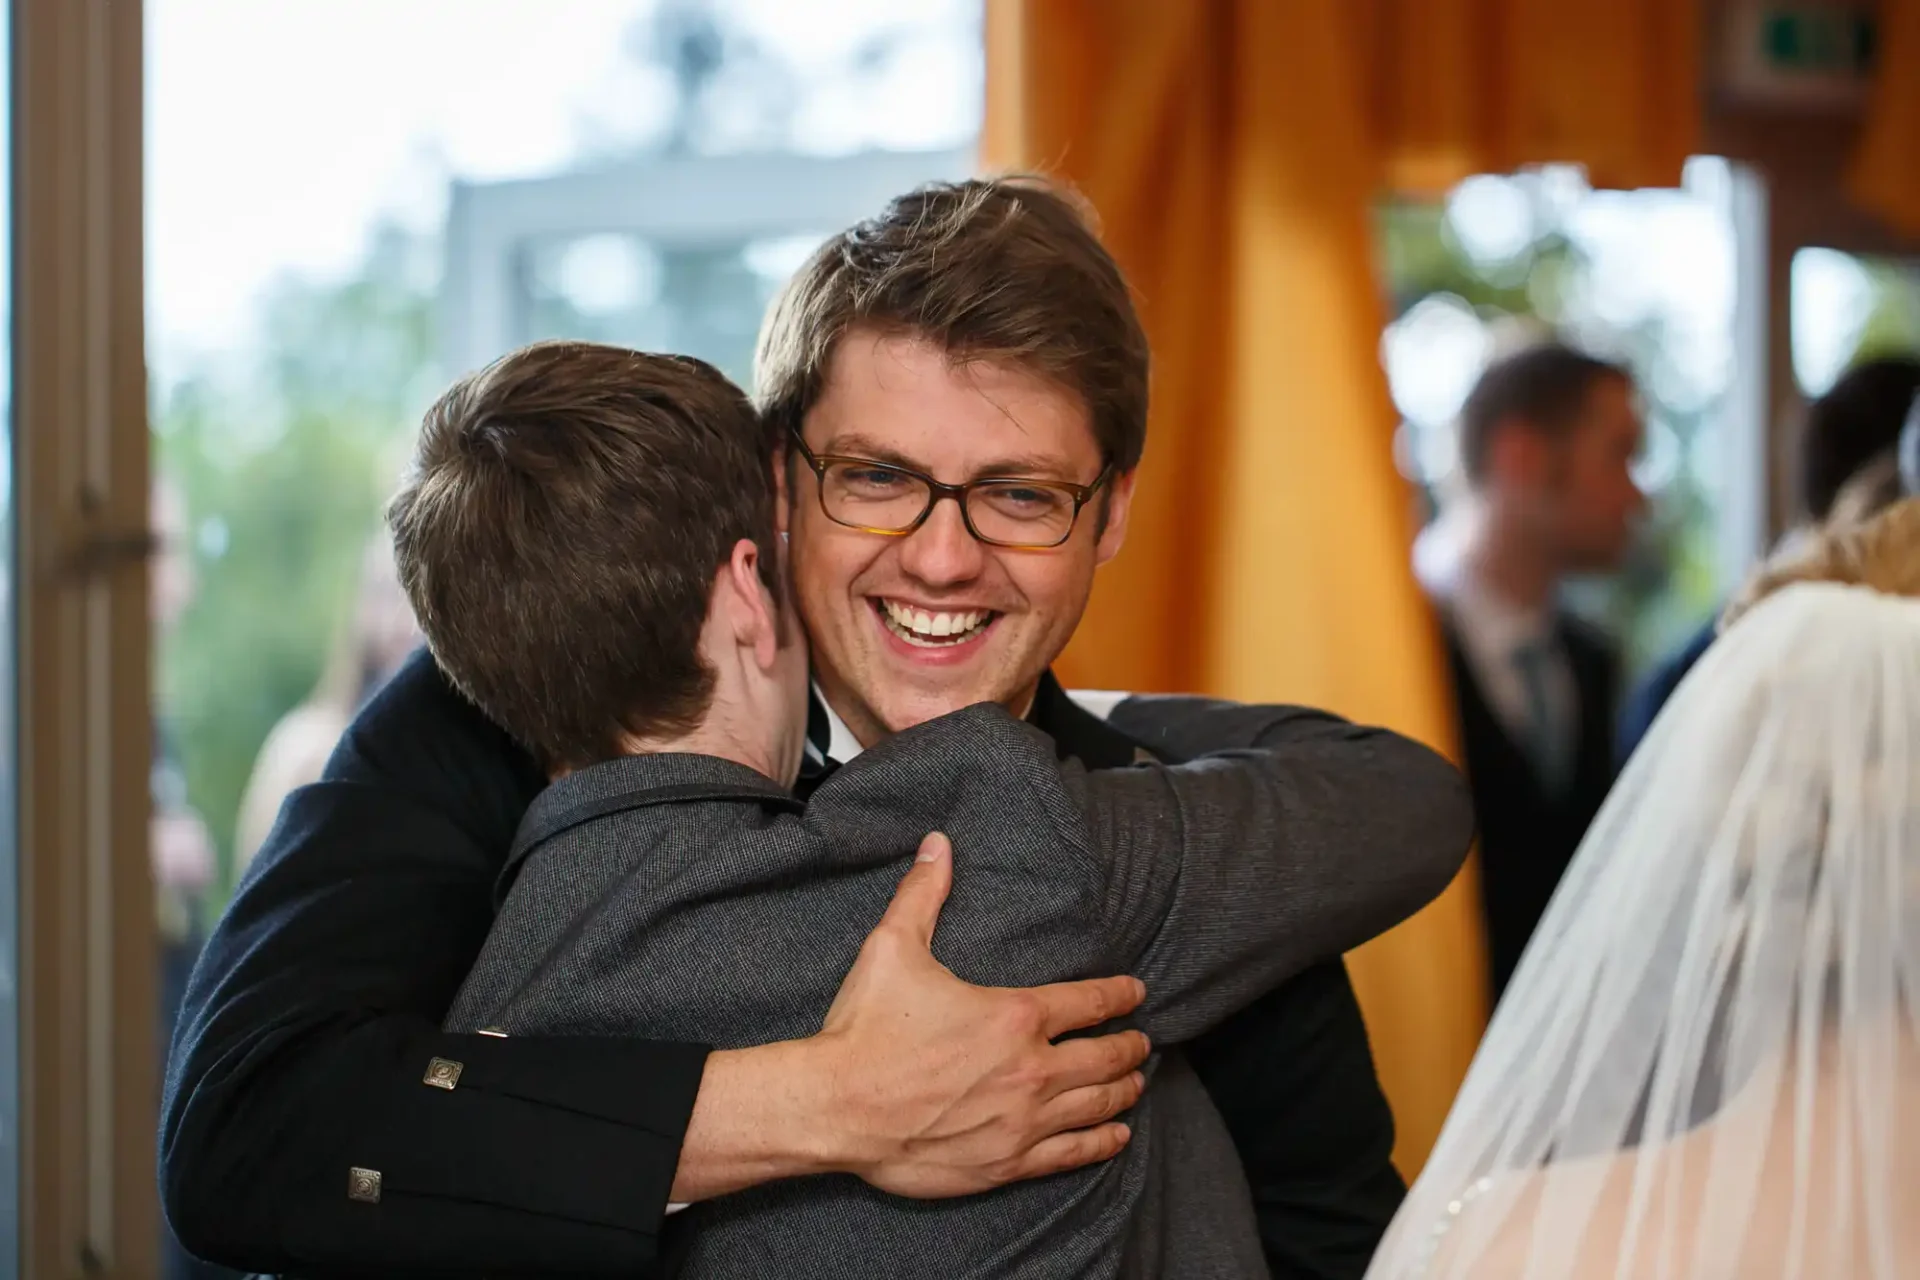 Two men embracing joyfully at a wedding reception, one facing the camera with a big smile.